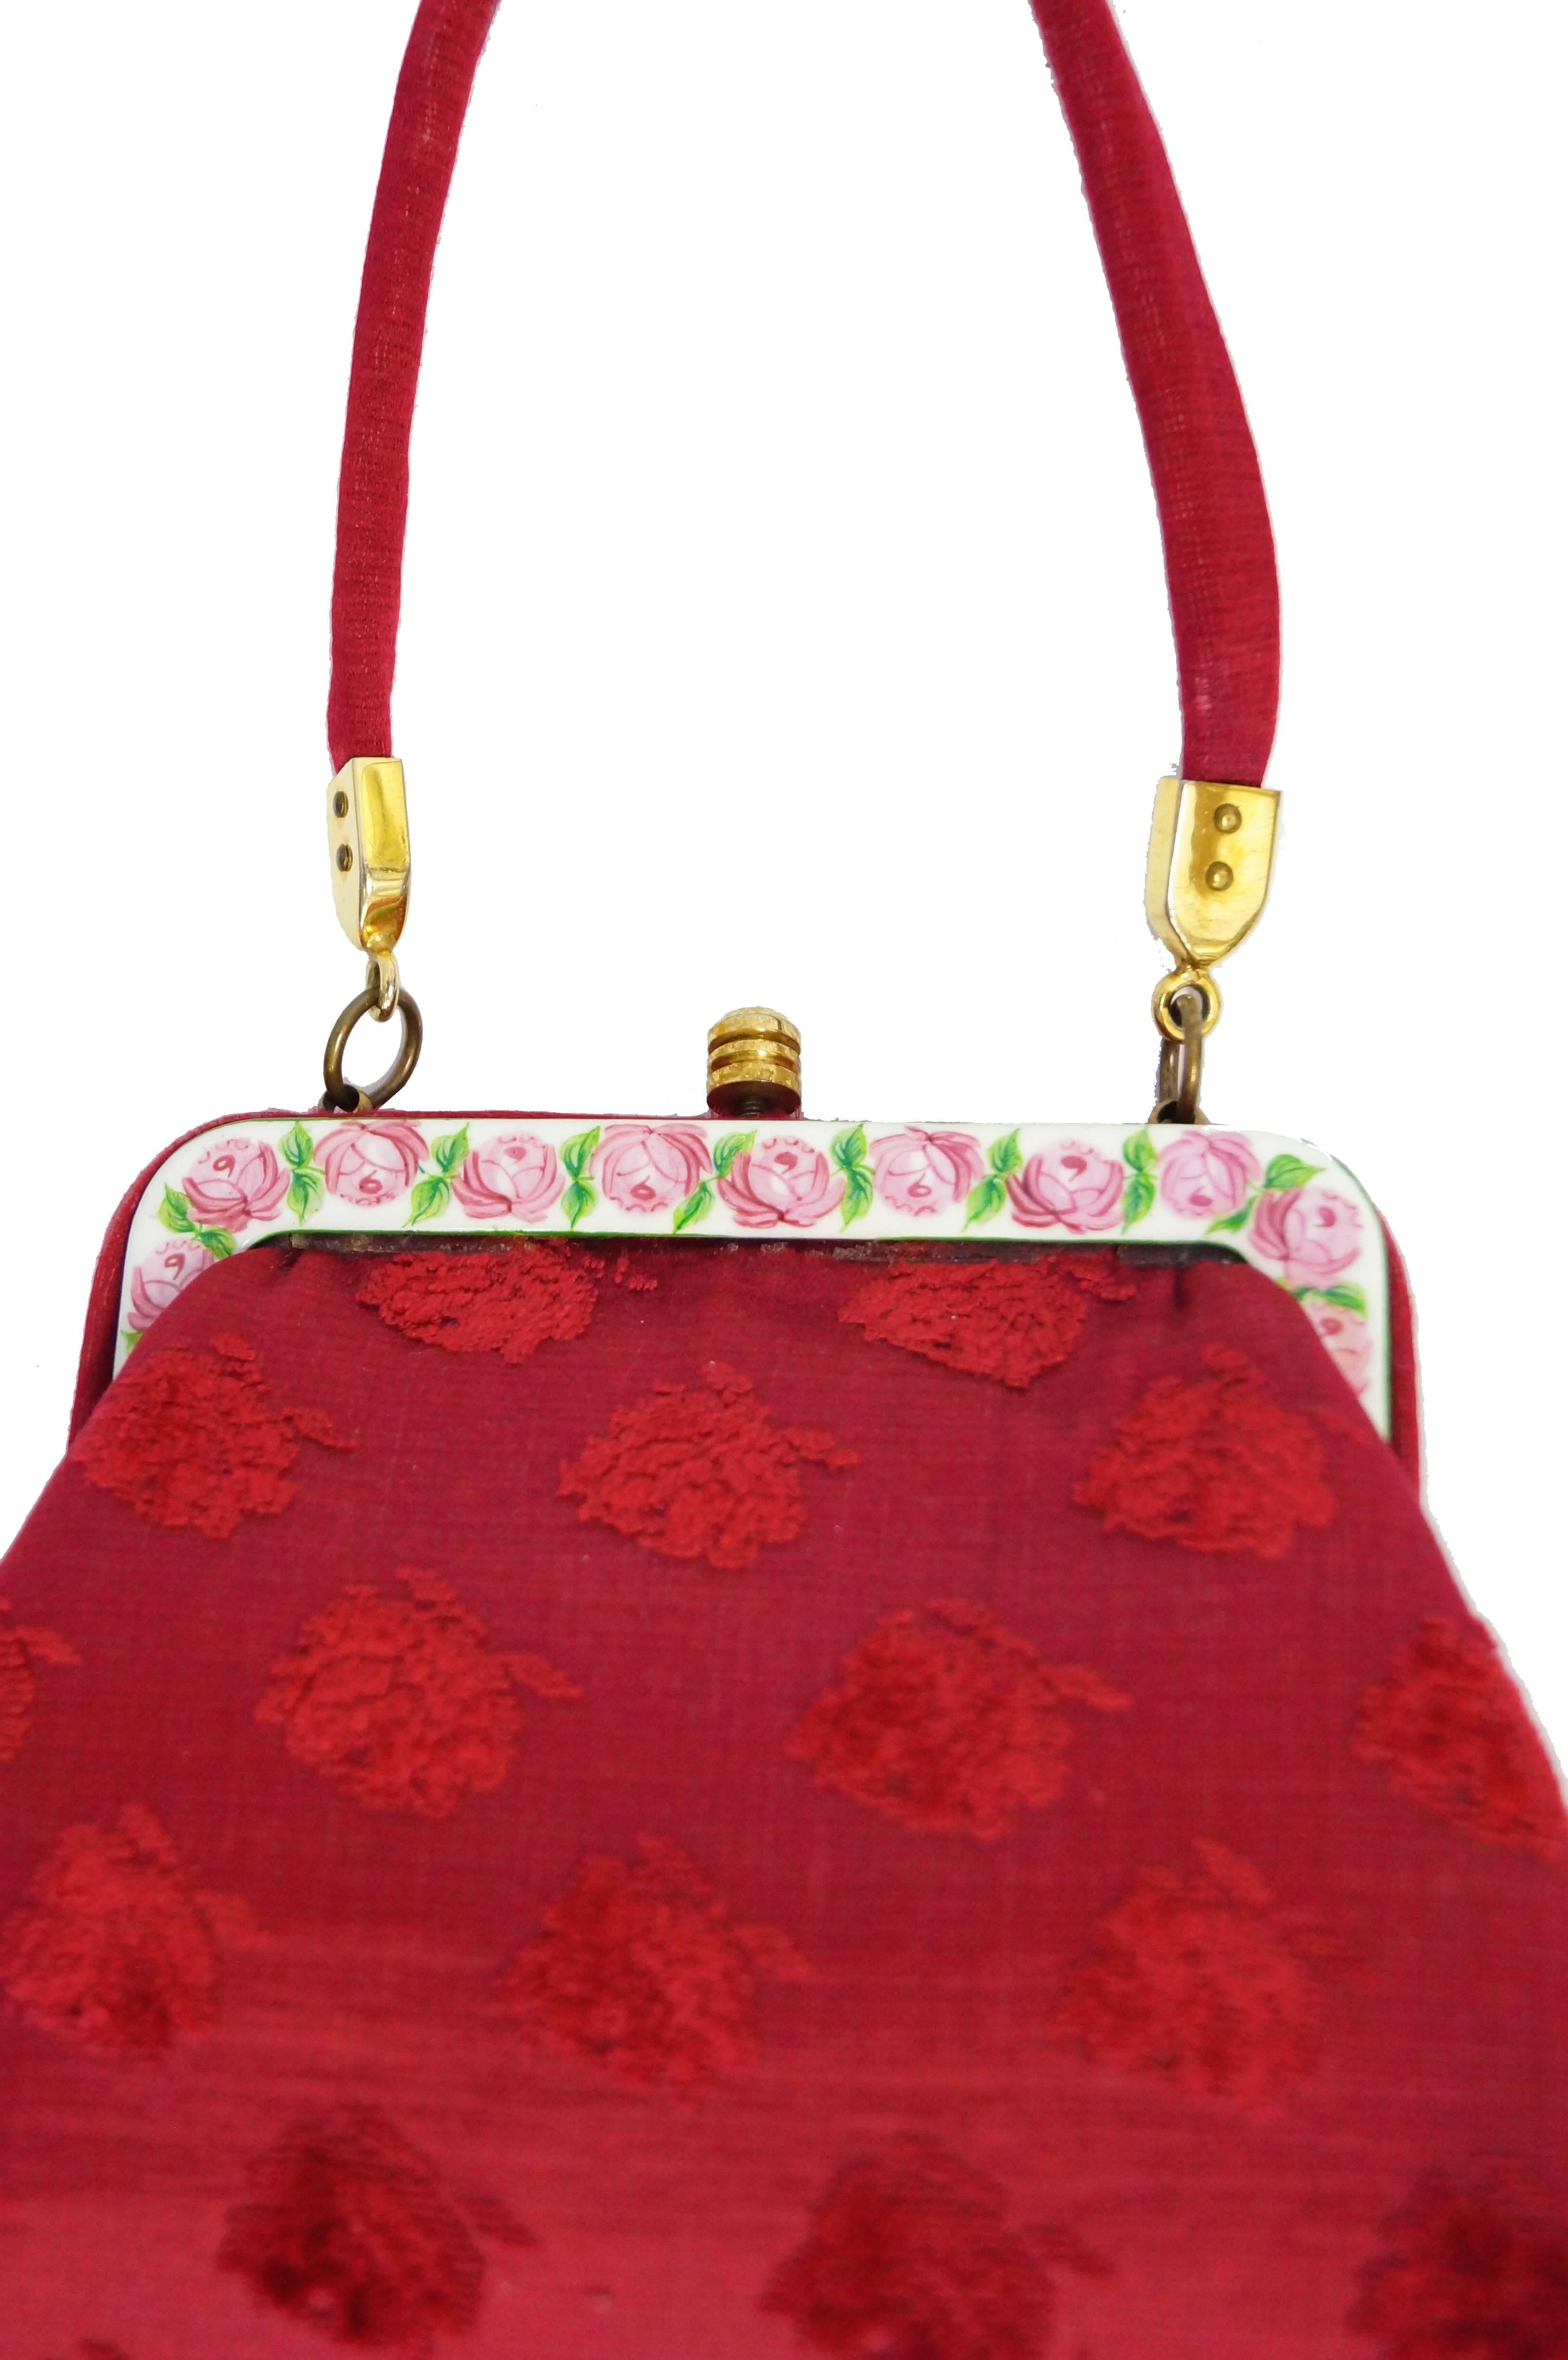 This Roberta di Camerino top handle handbag is composed of a pinkish red flocked floral tapestry structured triangular body with matching thin strap, and a hand painted pink and green floral porcelain closure snap. Gold tone hardware. Handbag has